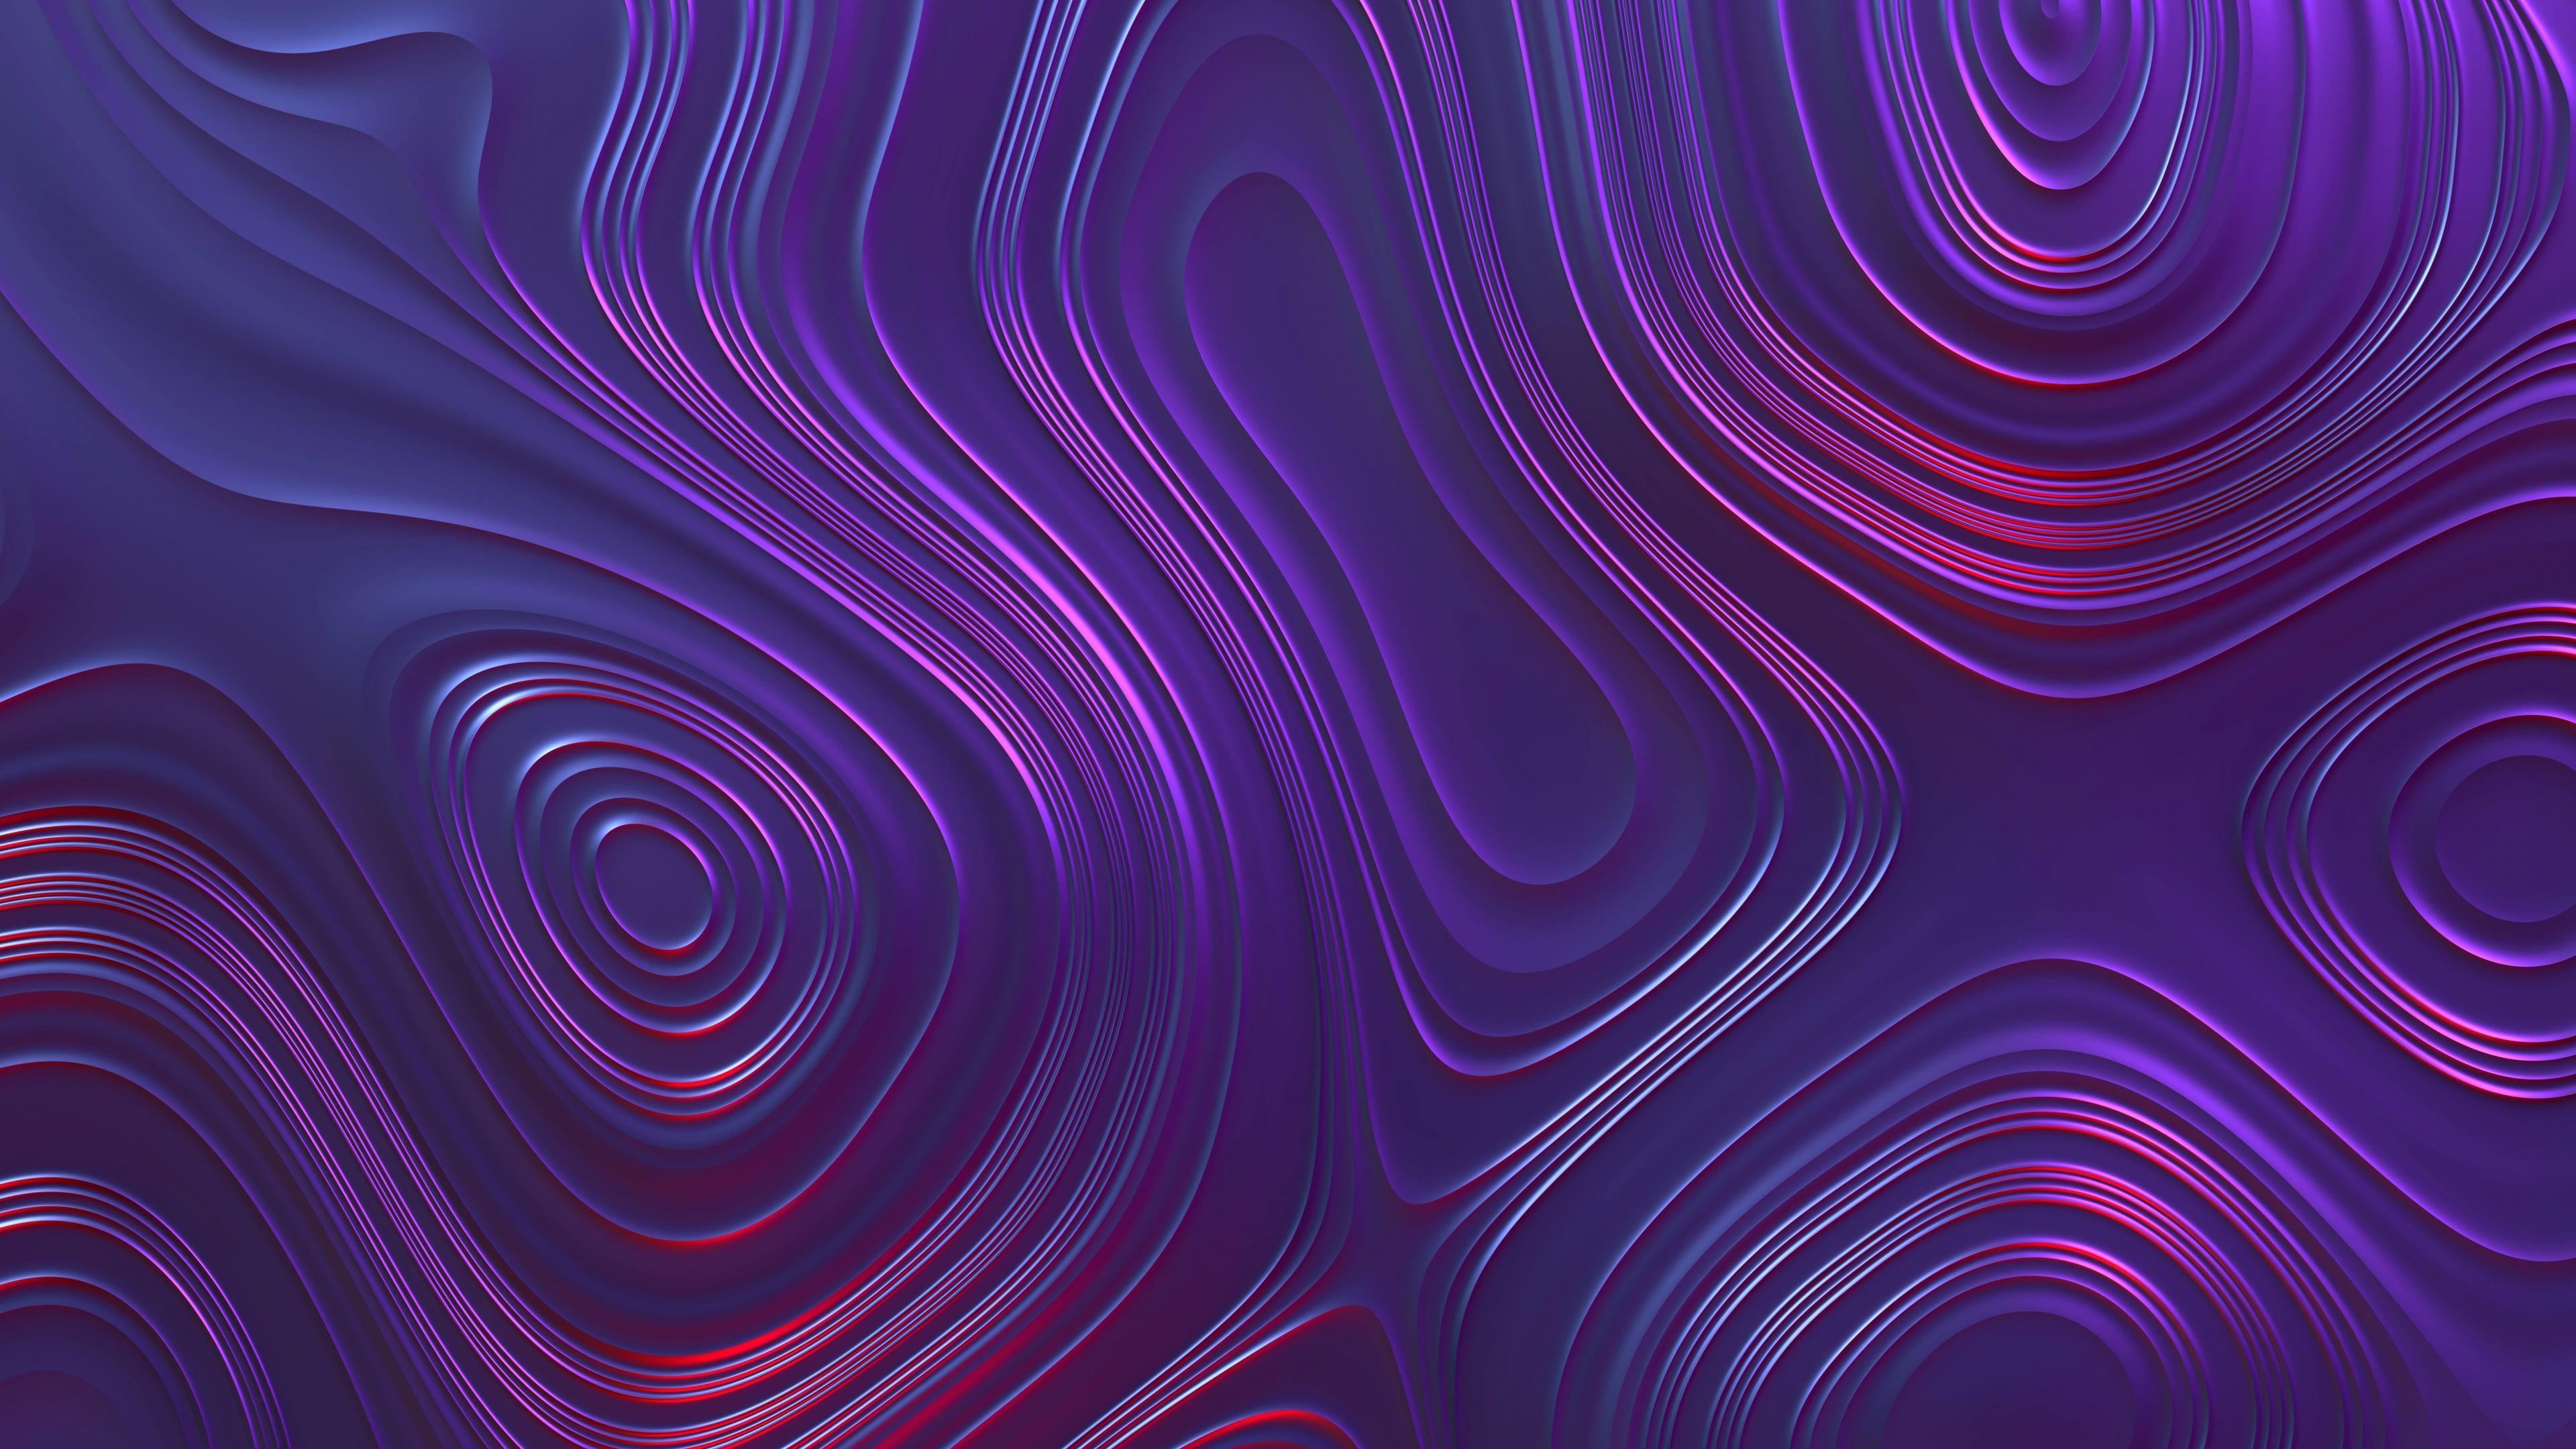 Waves Abstract 4k Wallpapers - Wallpaper Cave